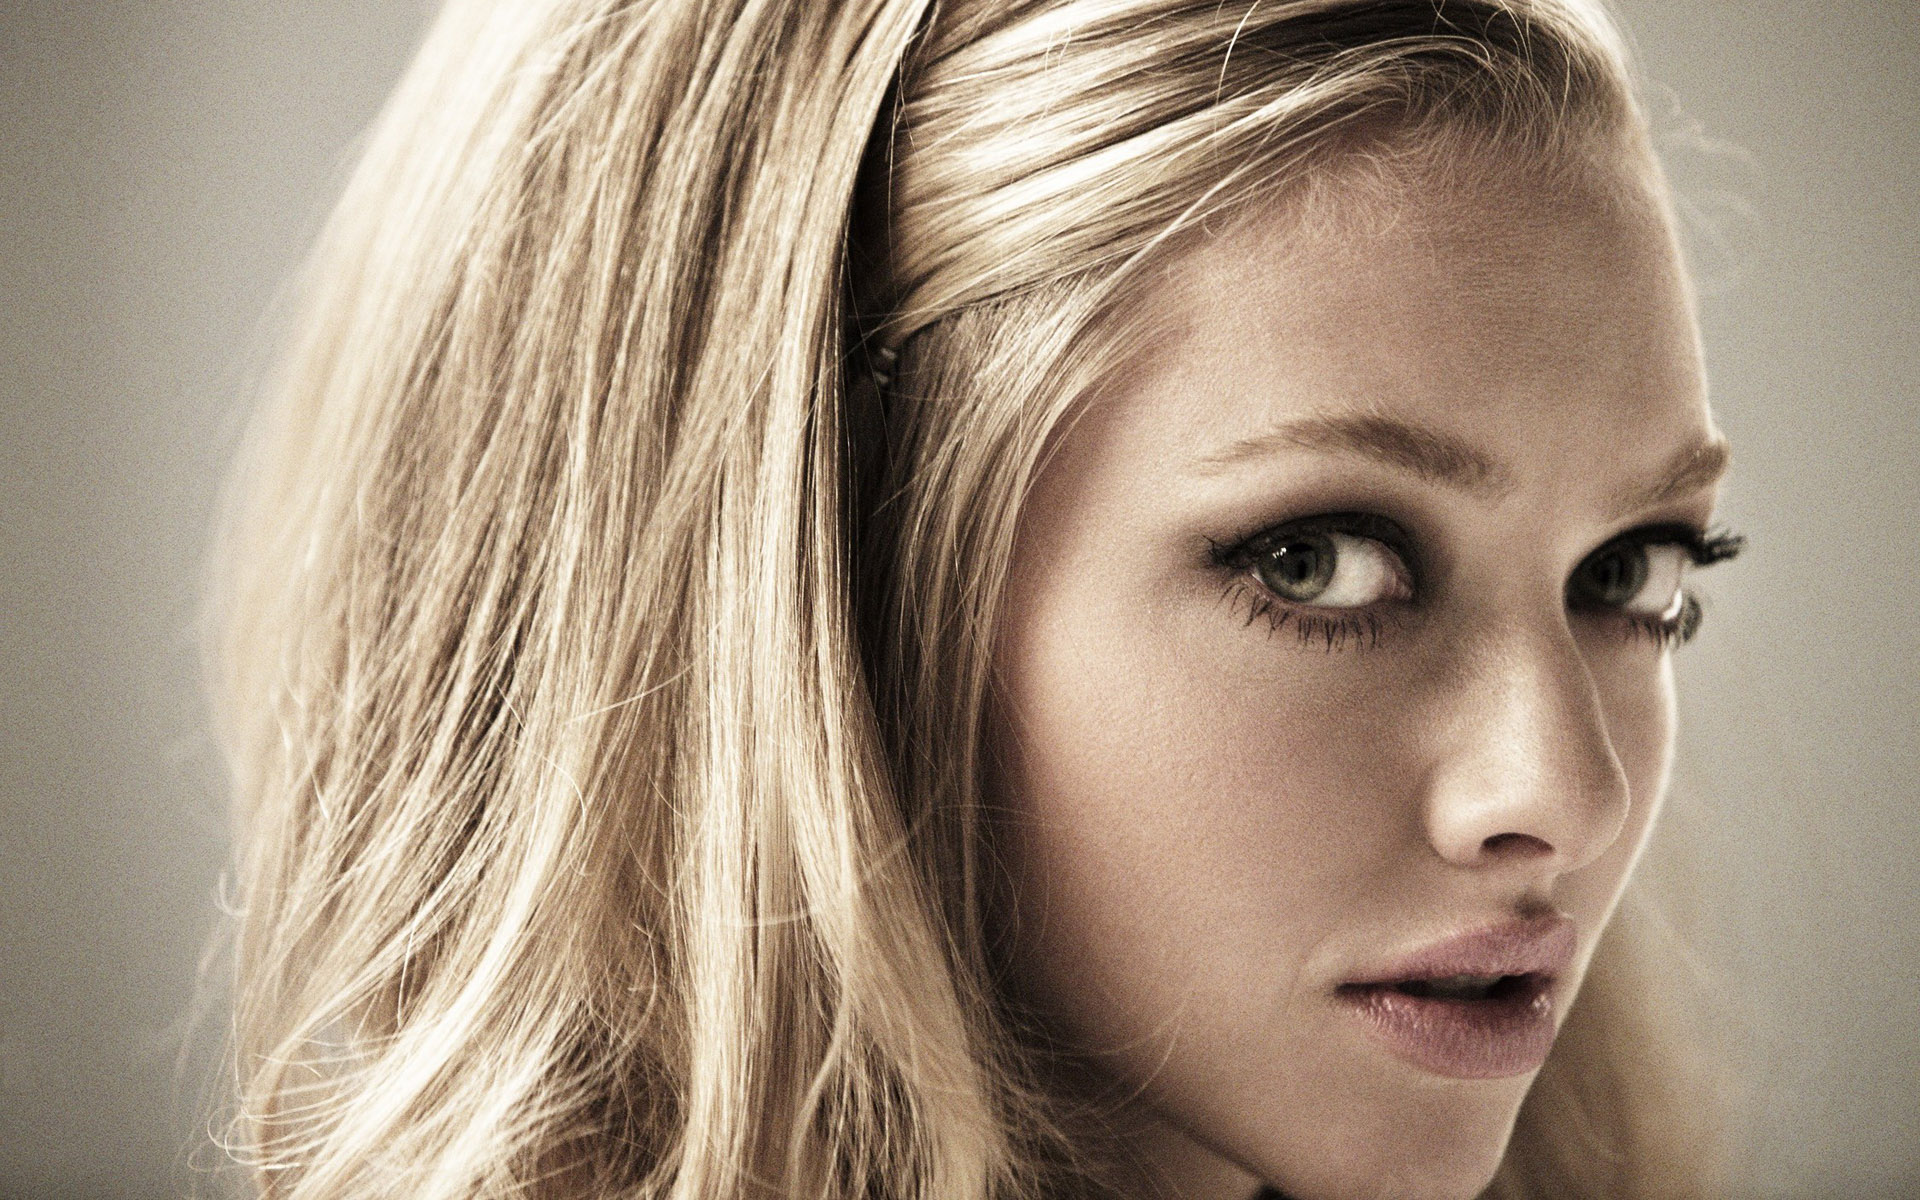 HD Wallpapers Amanda Seyfried high quality and definition